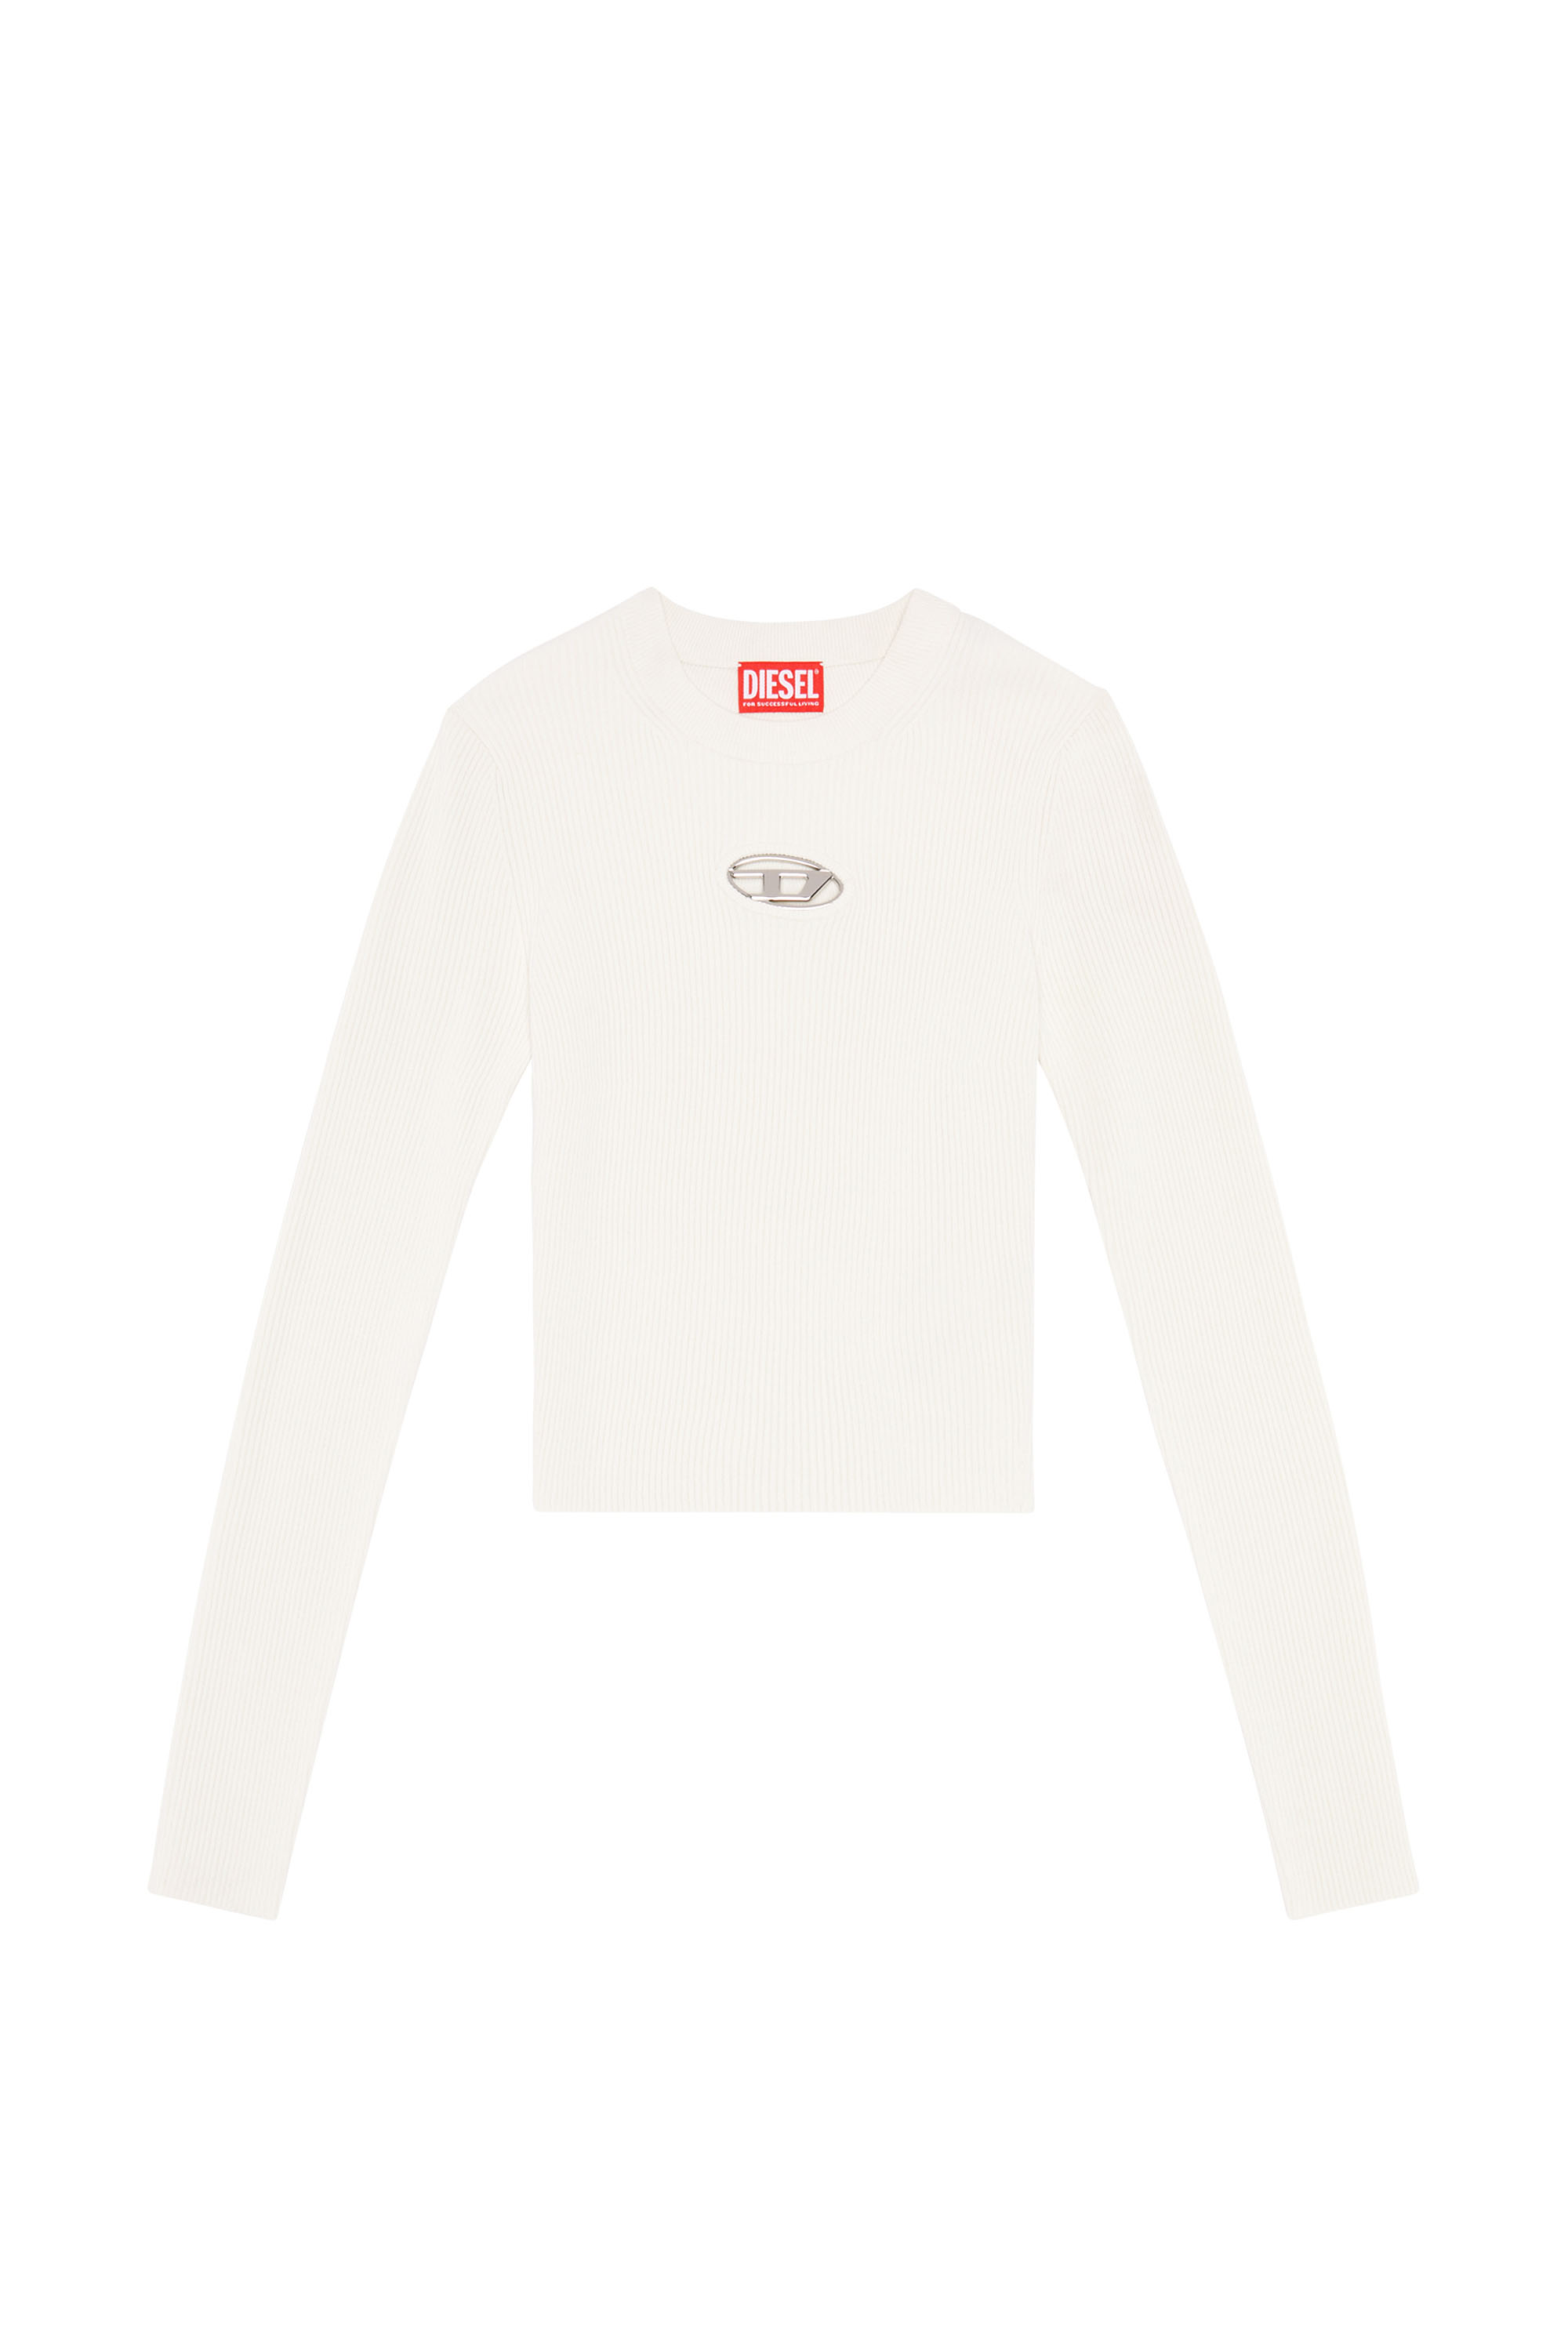 Diesel - M-VALARY, Woman Ribbed-knit long-sleeve top in White - Image 3